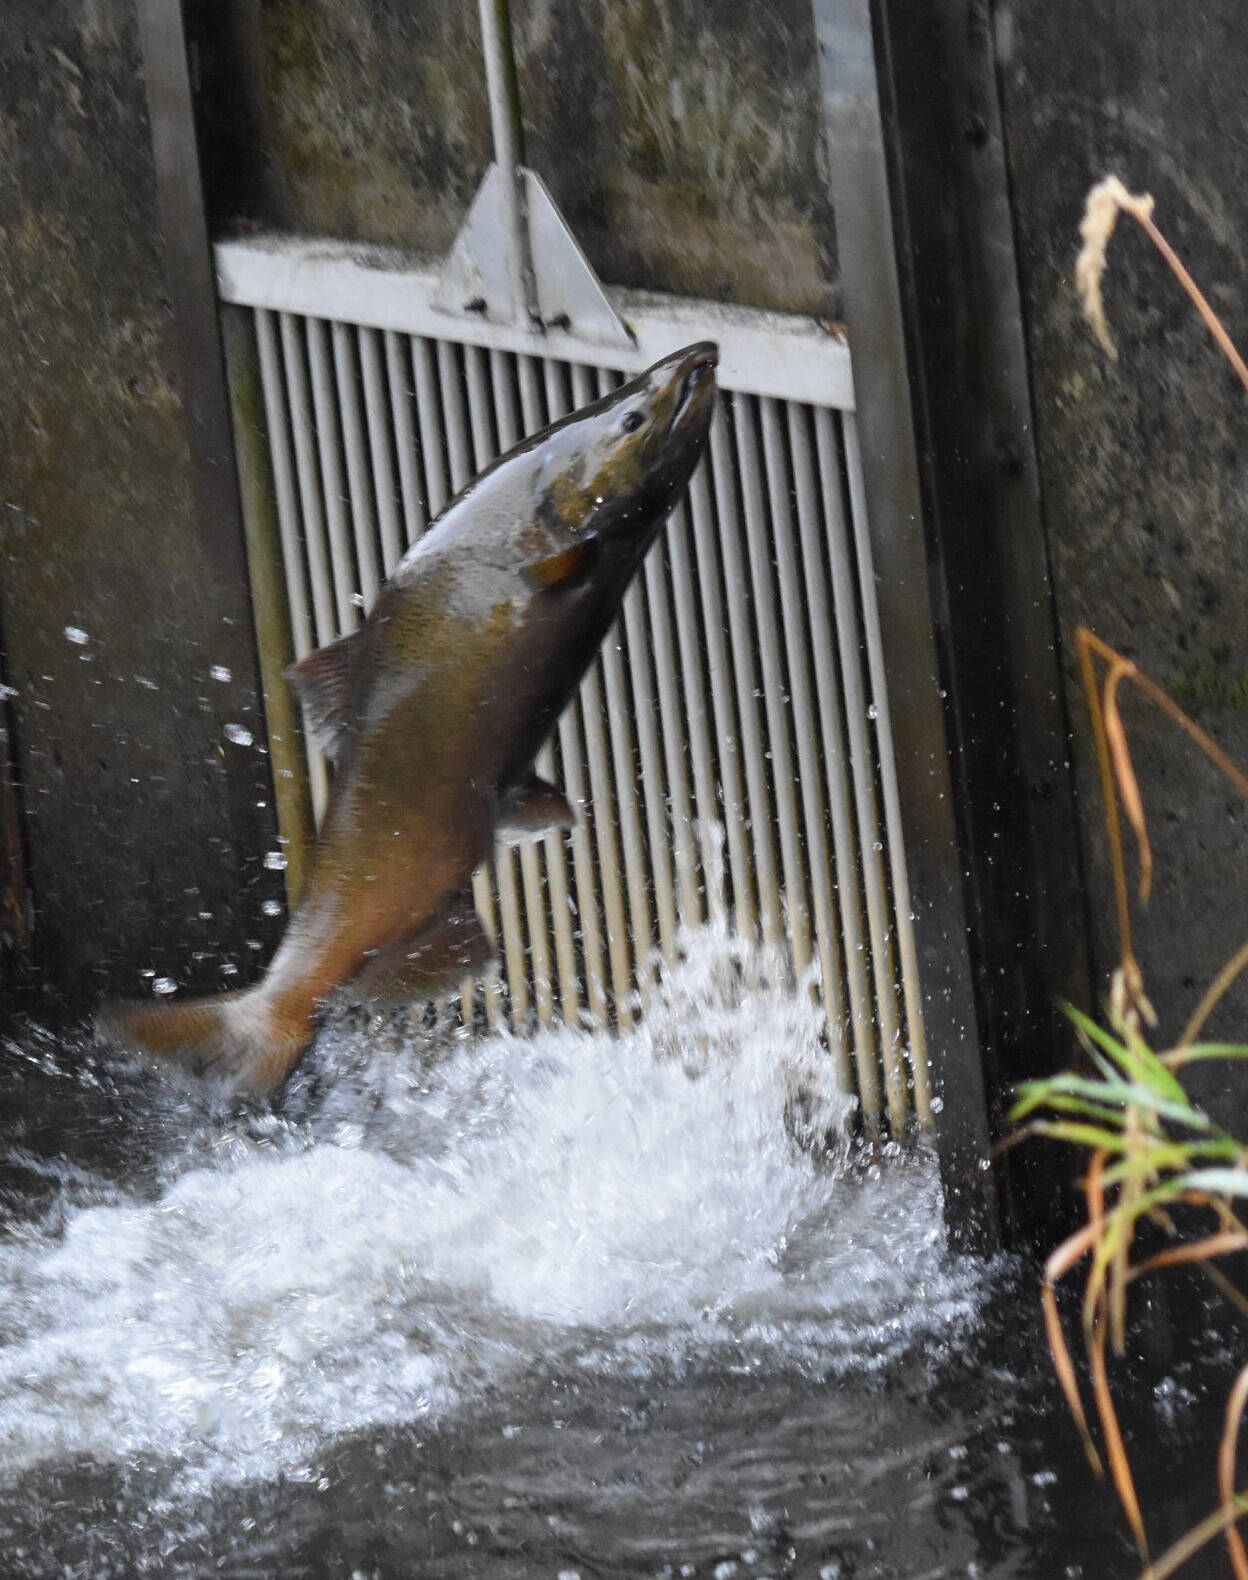 Salmon makes its way up stream to spawn. (Photo by Oscar Kelley)